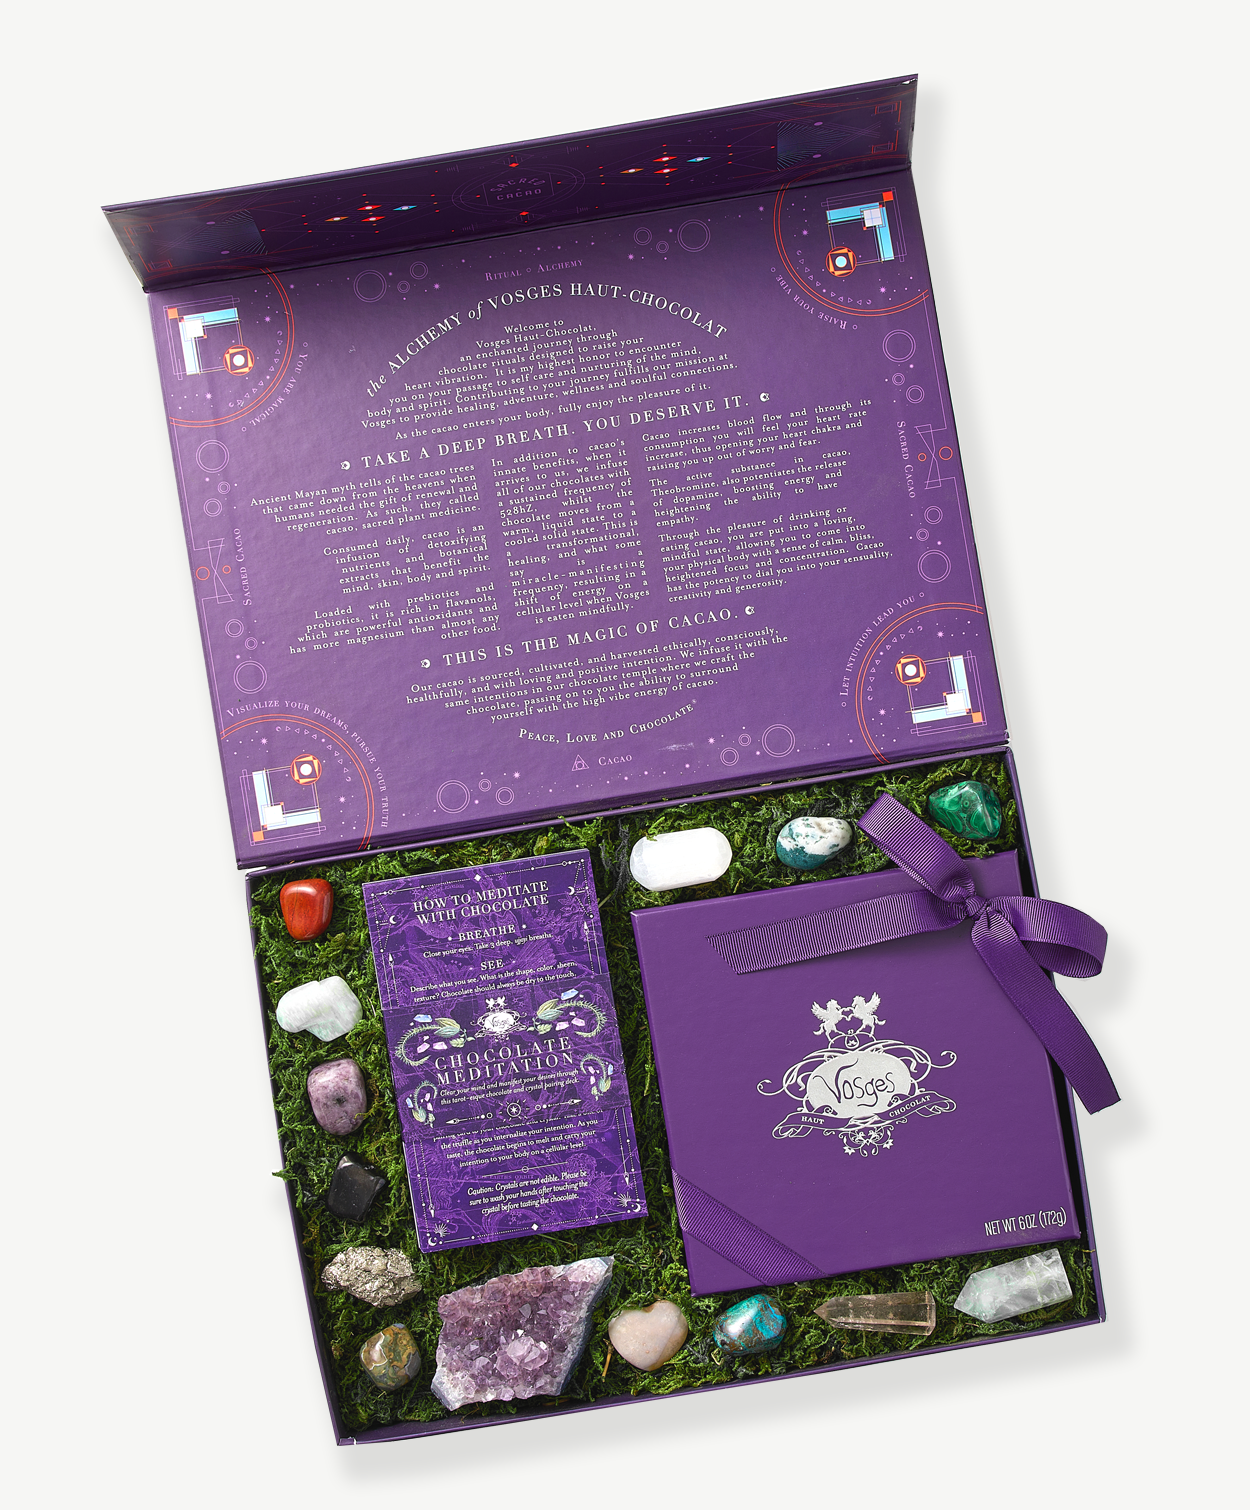 A large, purple giftbox sits open displaying a deck of meditation cards, several crystals, precious stones and  a Vosges Meditation chocolate truffle collection embossed with silver foil tied with a purple ribbon bow nestled in green moss on a grey background.